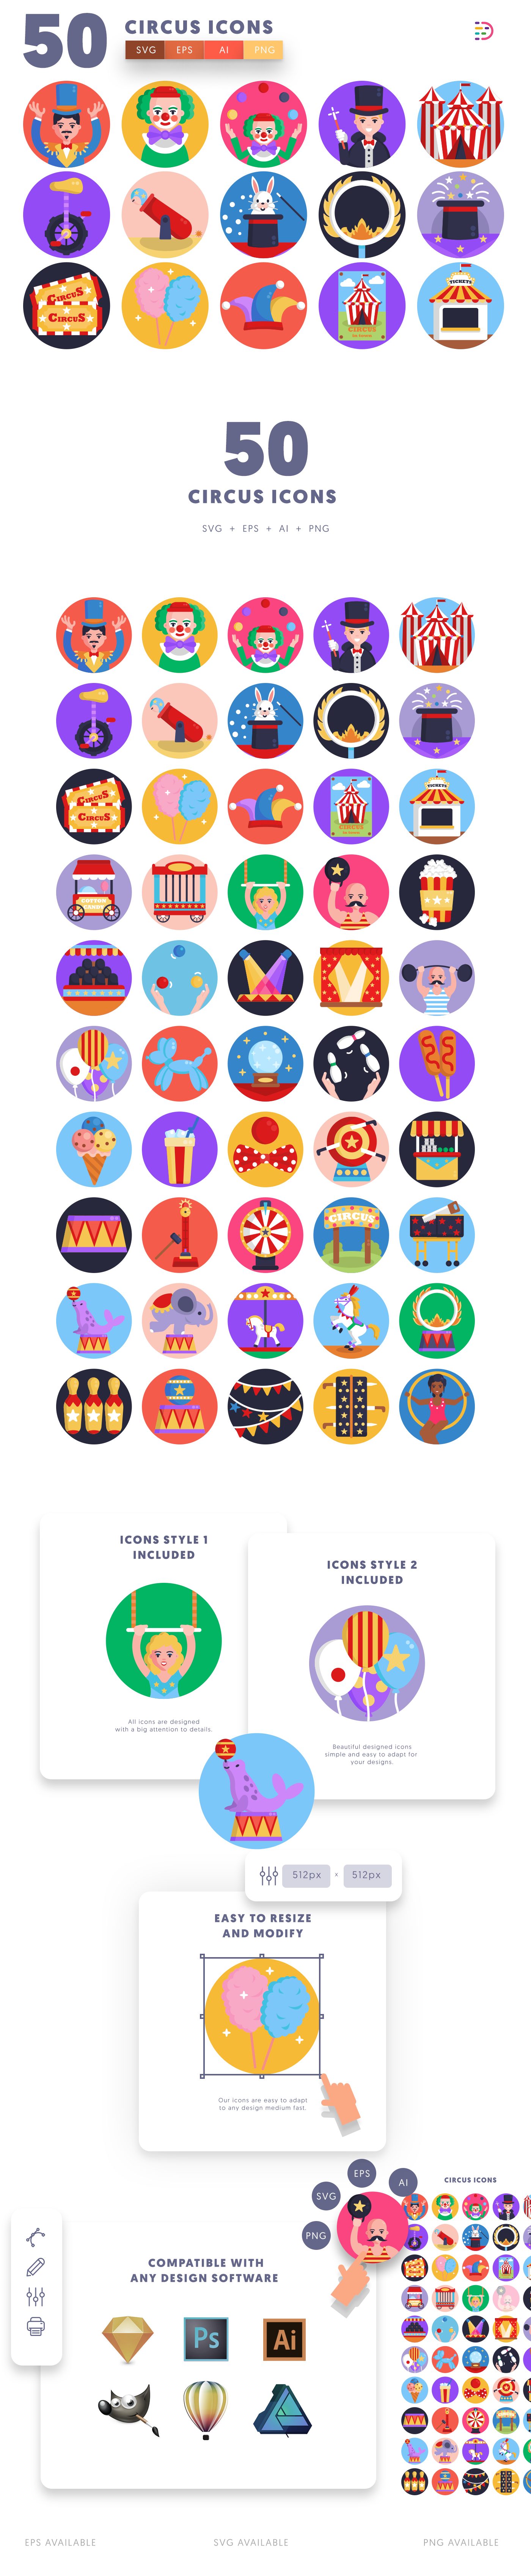 Editable circus icon pack, easy to edit and customize icons